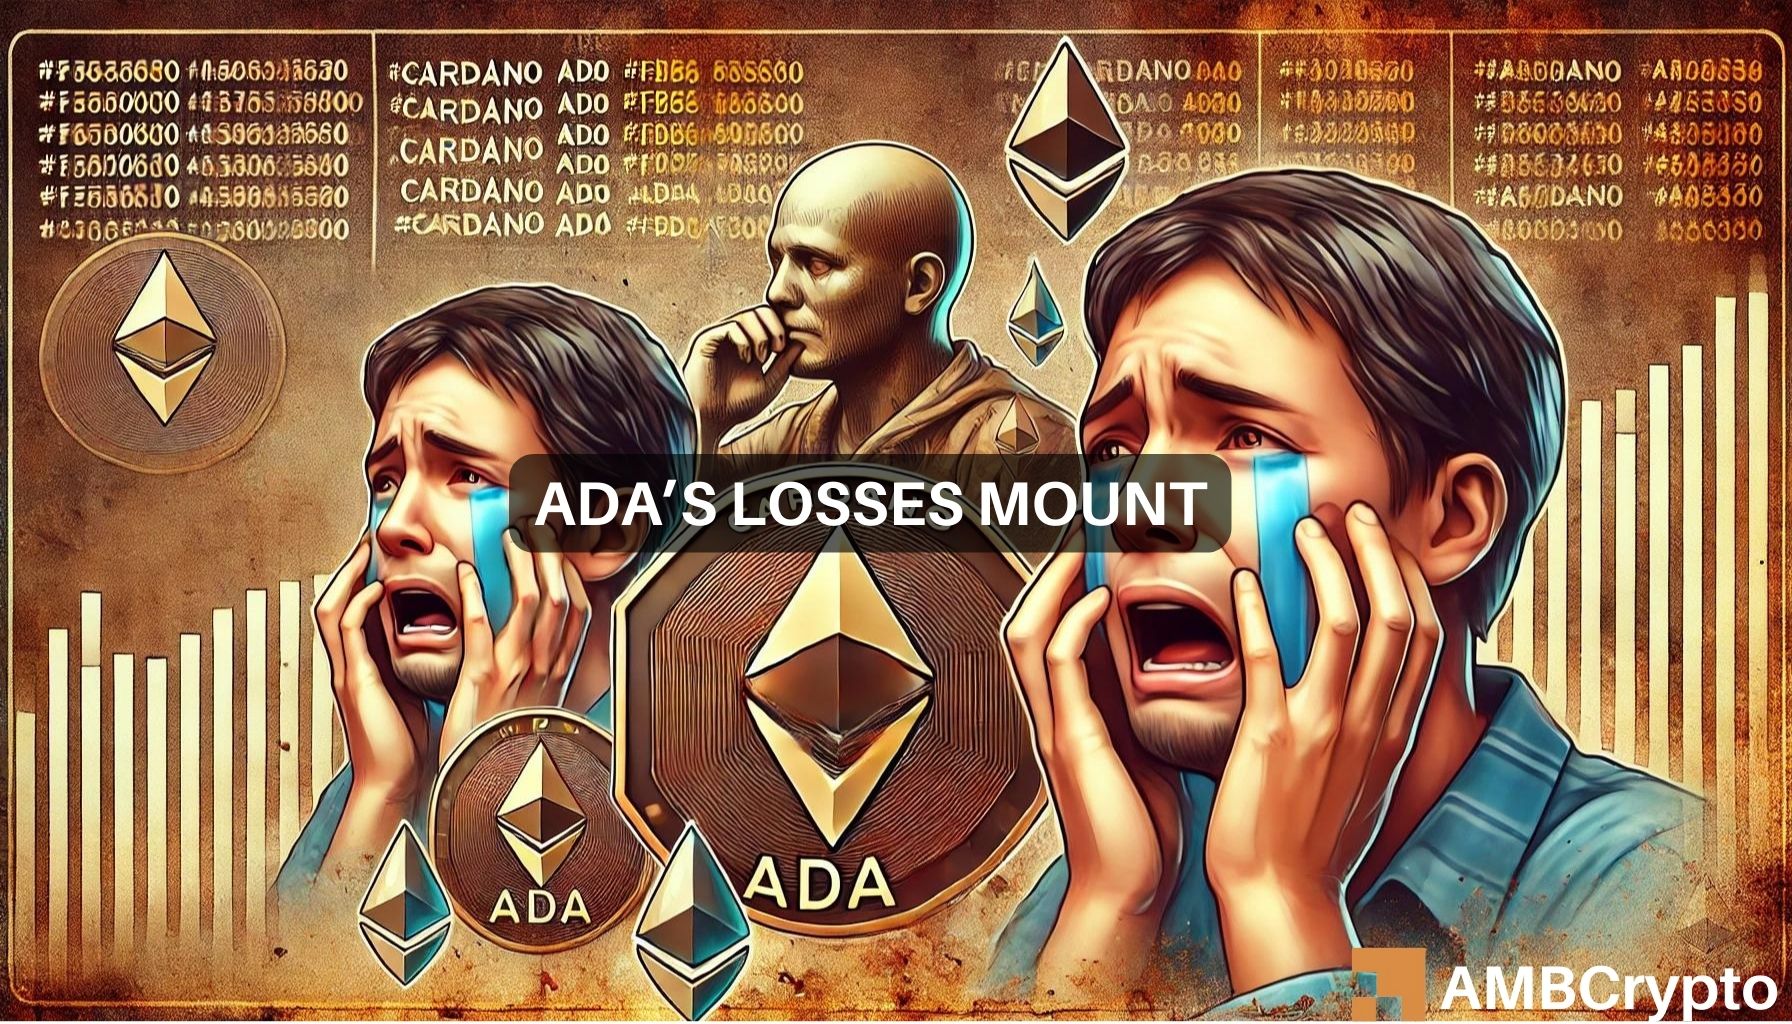 ADA sees strong on-chain support despite a huge proportion of holders experiencing losses.